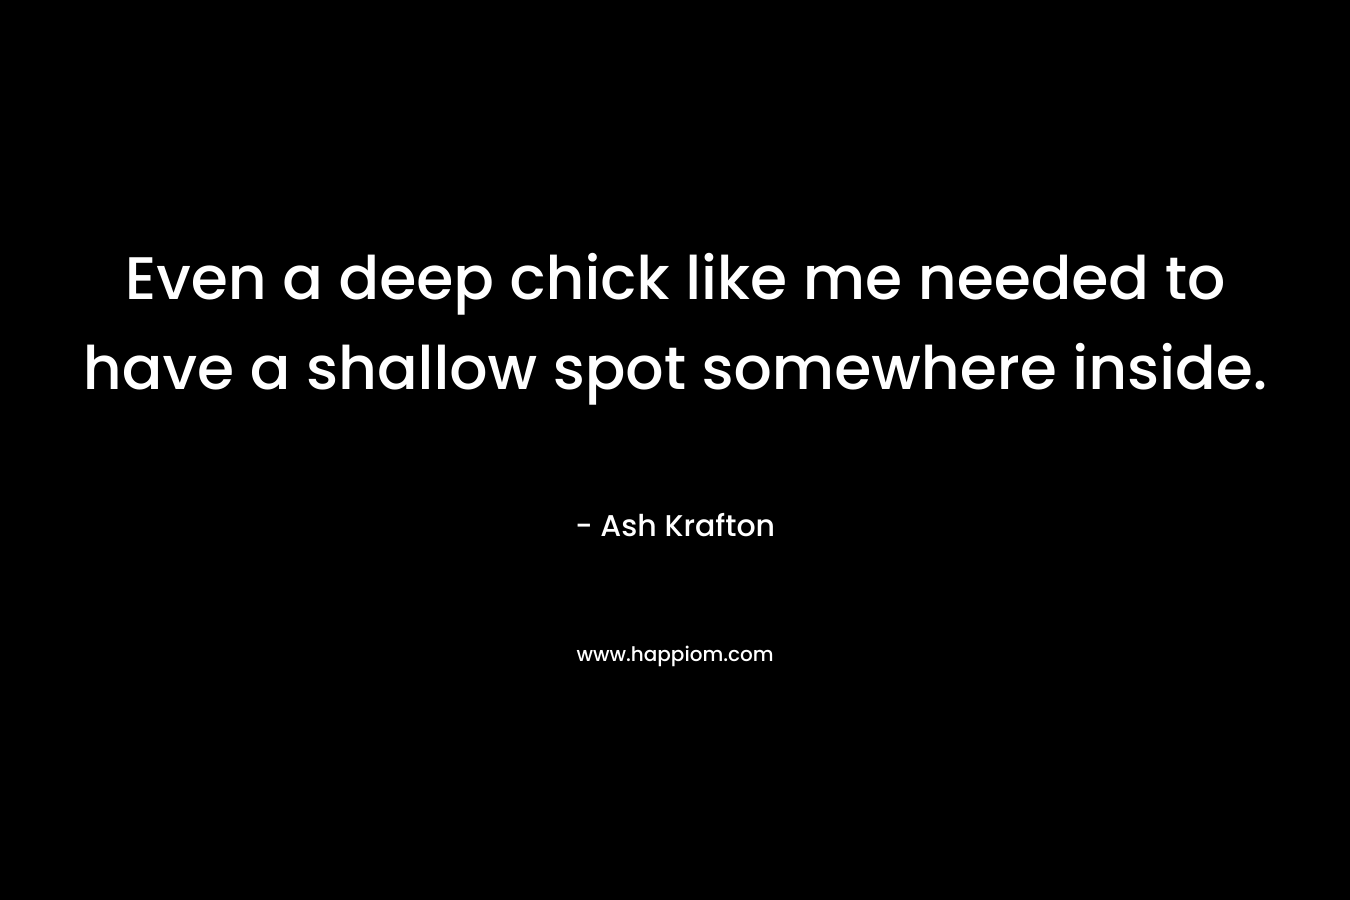 Even a deep chick like me needed to have a shallow spot somewhere inside. – Ash Krafton